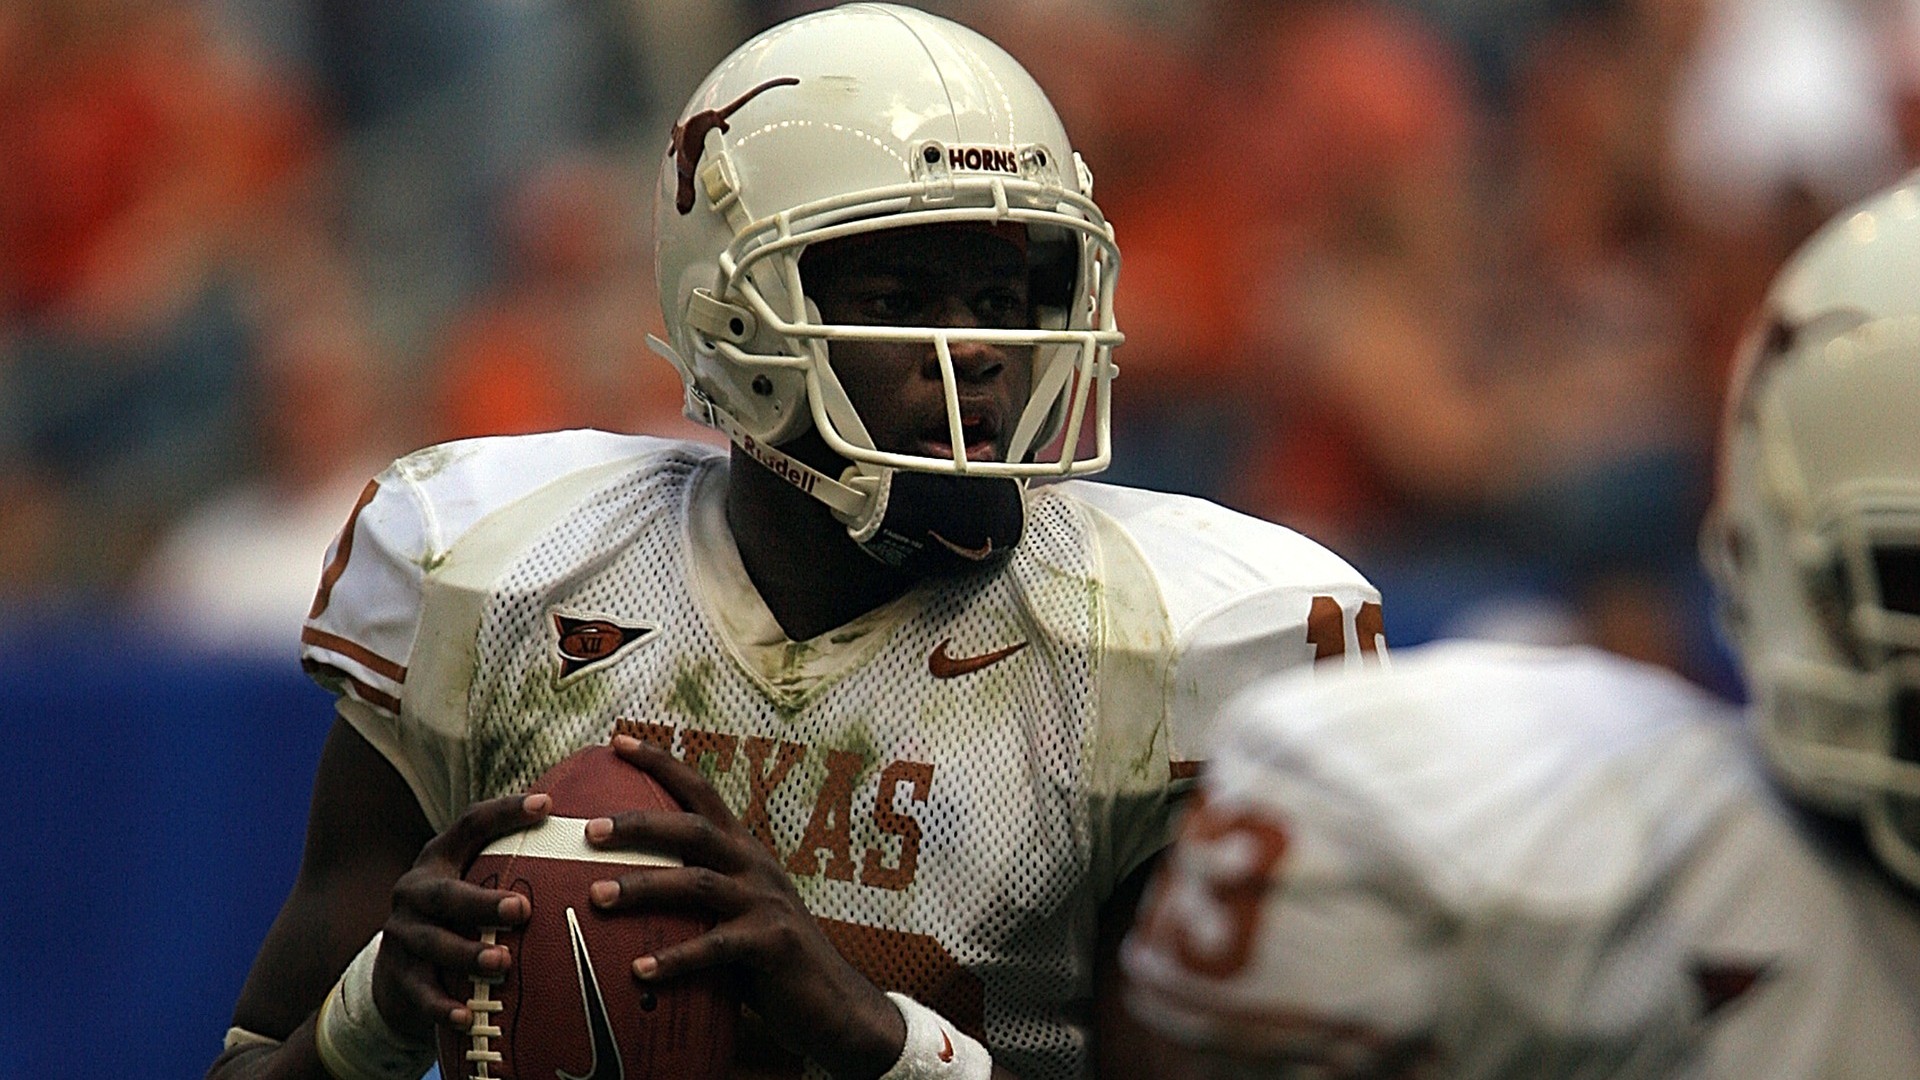 Photo of a UT Longhorn during a game (Pixbay)